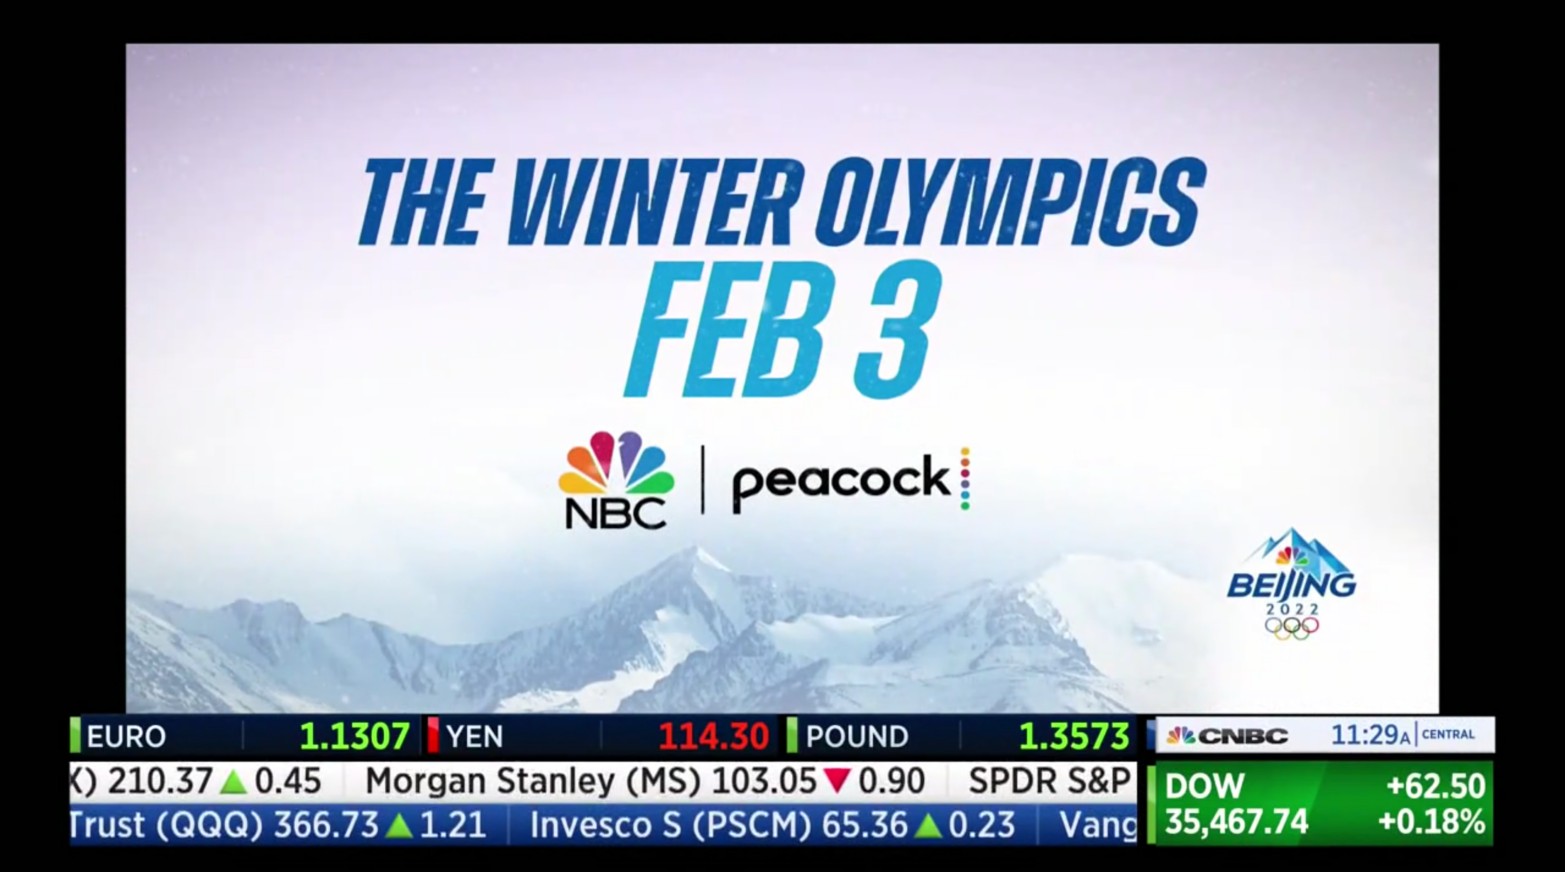 An advertisement for the 2022 Winter Olympics airs on CNBC, with the channel’s financial lower thirds visible below the ad.